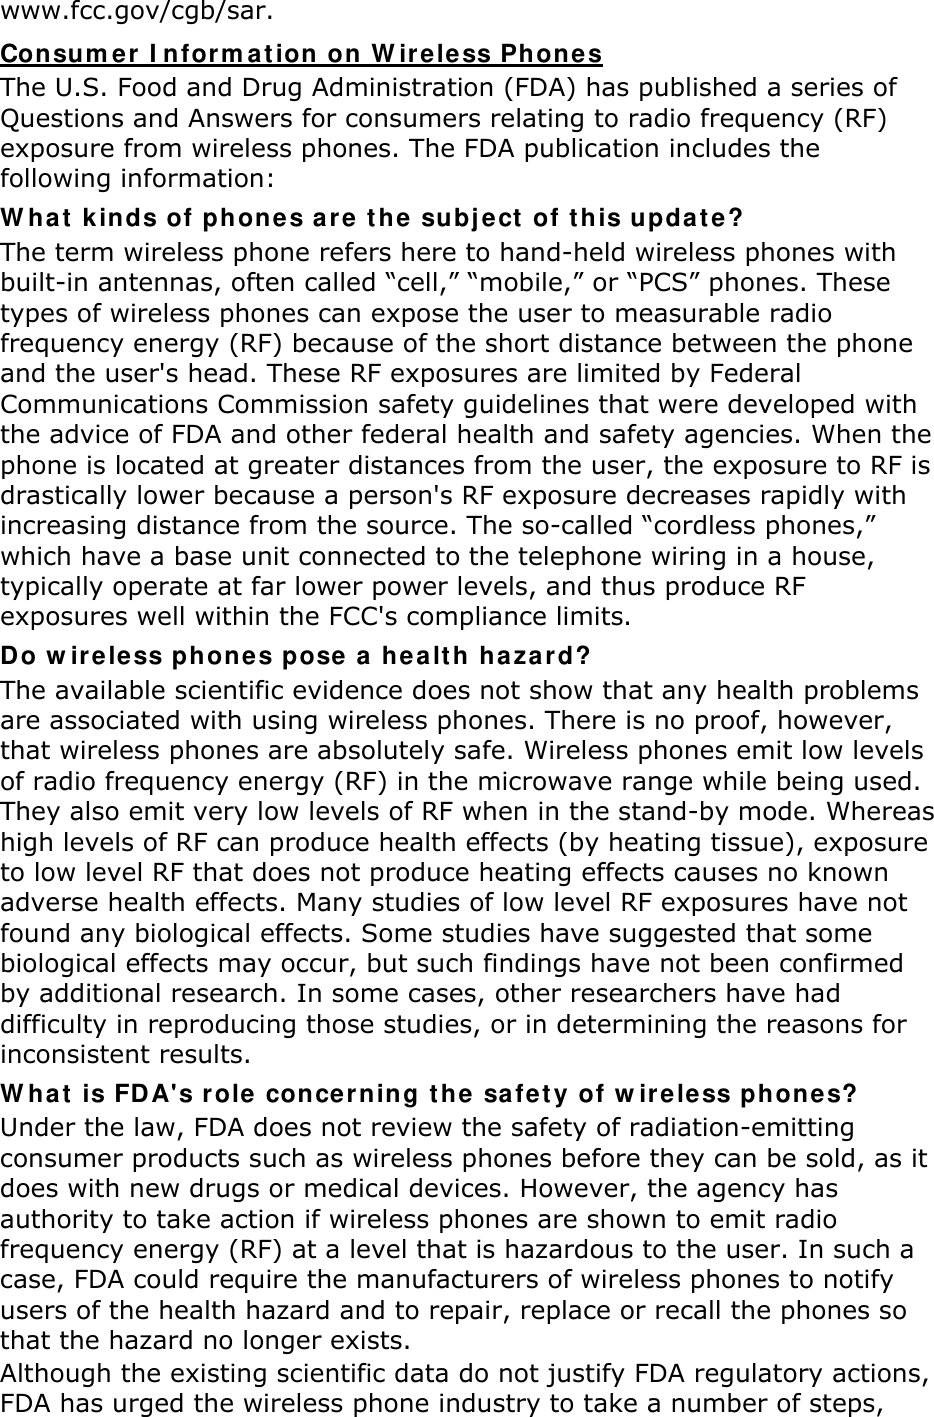 www.fcc.gov/cgb/sar. Con sum er I nfor m at ion  on W ir e less Phones The U.S. Food and Drug Administration (FDA) has published a series of Questions and Answers for consumers relating to radio frequency (RF) exposure from wireless phones. The FDA publication includes the following information: W ha t  k inds of phon e s are t he  subj ect  of t his updat e? The term wireless phone refers here to hand-held wireless phones with built-in antennas, often called “cell,” “mobile,” or “PCS” phones. These types of wireless phones can expose the user to measurable radio frequency energy (RF) because of the short distance between the phone and the user&apos;s head. These RF exposures are limited by Federal Communications Commission safety guidelines that were developed with the advice of FDA and other federal health and safety agencies. When the phone is located at greater distances from the user, the exposure to RF is drastically lower because a person&apos;s RF exposure decreases rapidly with increasing distance from the source. The so-called “cordless phones,” which have a base unit connected to the telephone wiring in a house, typically operate at far lower power levels, and thus produce RF exposures well within the FCC&apos;s compliance limits. Do w ireless phone s pose  a healt h ha za r d? The available scientific evidence does not show that any health problems are associated with using wireless phones. There is no proof, however, that wireless phones are absolutely safe. Wireless phones emit low levels of radio frequency energy (RF) in the microwave range while being used. They also emit very low levels of RF when in the stand-by mode. Whereas high levels of RF can produce health effects (by heating tissue), exposure to low level RF that does not produce heating effects causes no known adverse health effects. Many studies of low level RF exposures have not found any biological effects. Some studies have suggested that some biological effects may occur, but such findings have not been confirmed by additional research. In some cases, other researchers have had difficulty in reproducing those studies, or in determining the reasons for inconsistent results. W ha t  is FDA&apos;s r ole conce r ning t he  safet y of w ireless phone s? Under the law, FDA does not review the safety of radiation-emitting consumer products such as wireless phones before they can be sold, as it does with new drugs or medical devices. However, the agency has authority to take action if wireless phones are shown to emit radio frequency energy (RF) at a level that is hazardous to the user. In such a case, FDA could require the manufacturers of wireless phones to notify users of the health hazard and to repair, replace or recall the phones so that the hazard no longer exists. Although the existing scientific data do not justify FDA regulatory actions, FDA has urged the wireless phone industry to take a number of steps, 